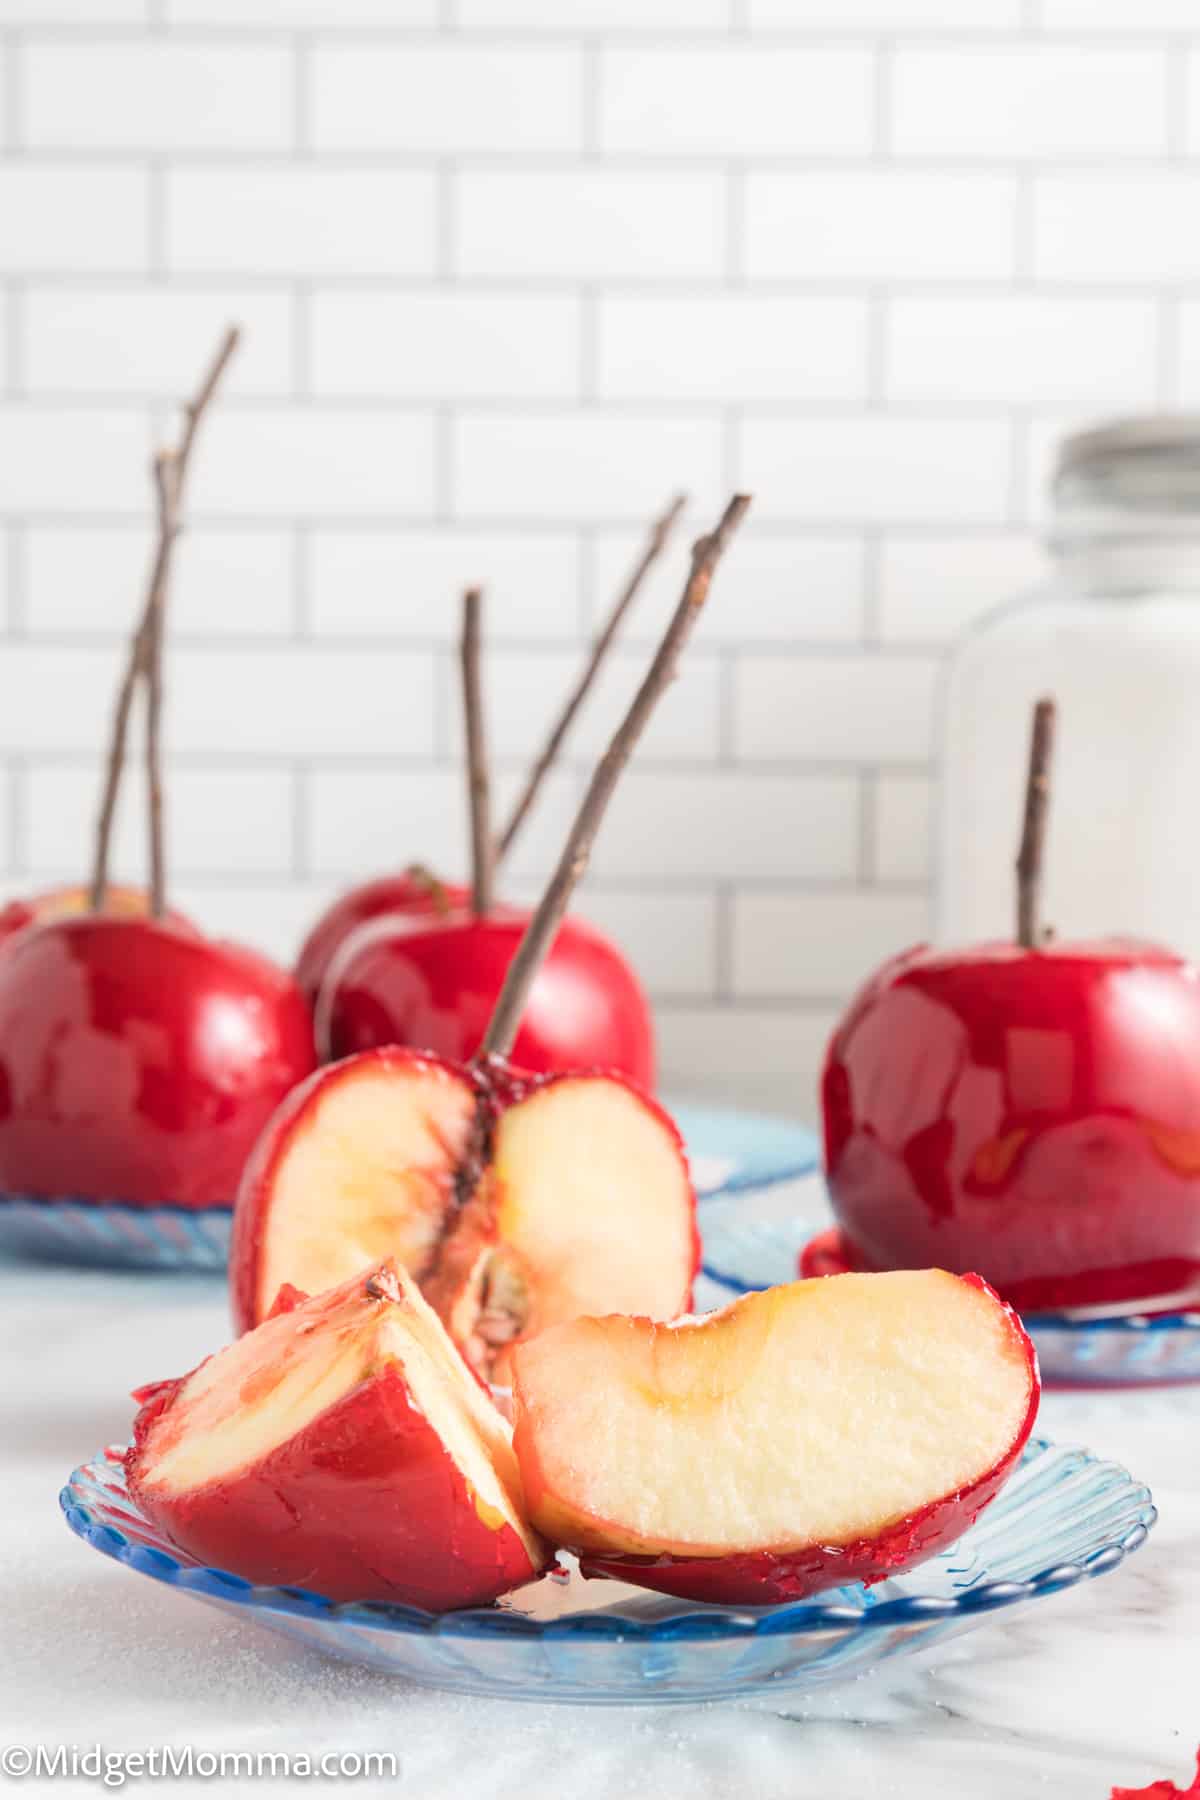 Candy apple cut into slices